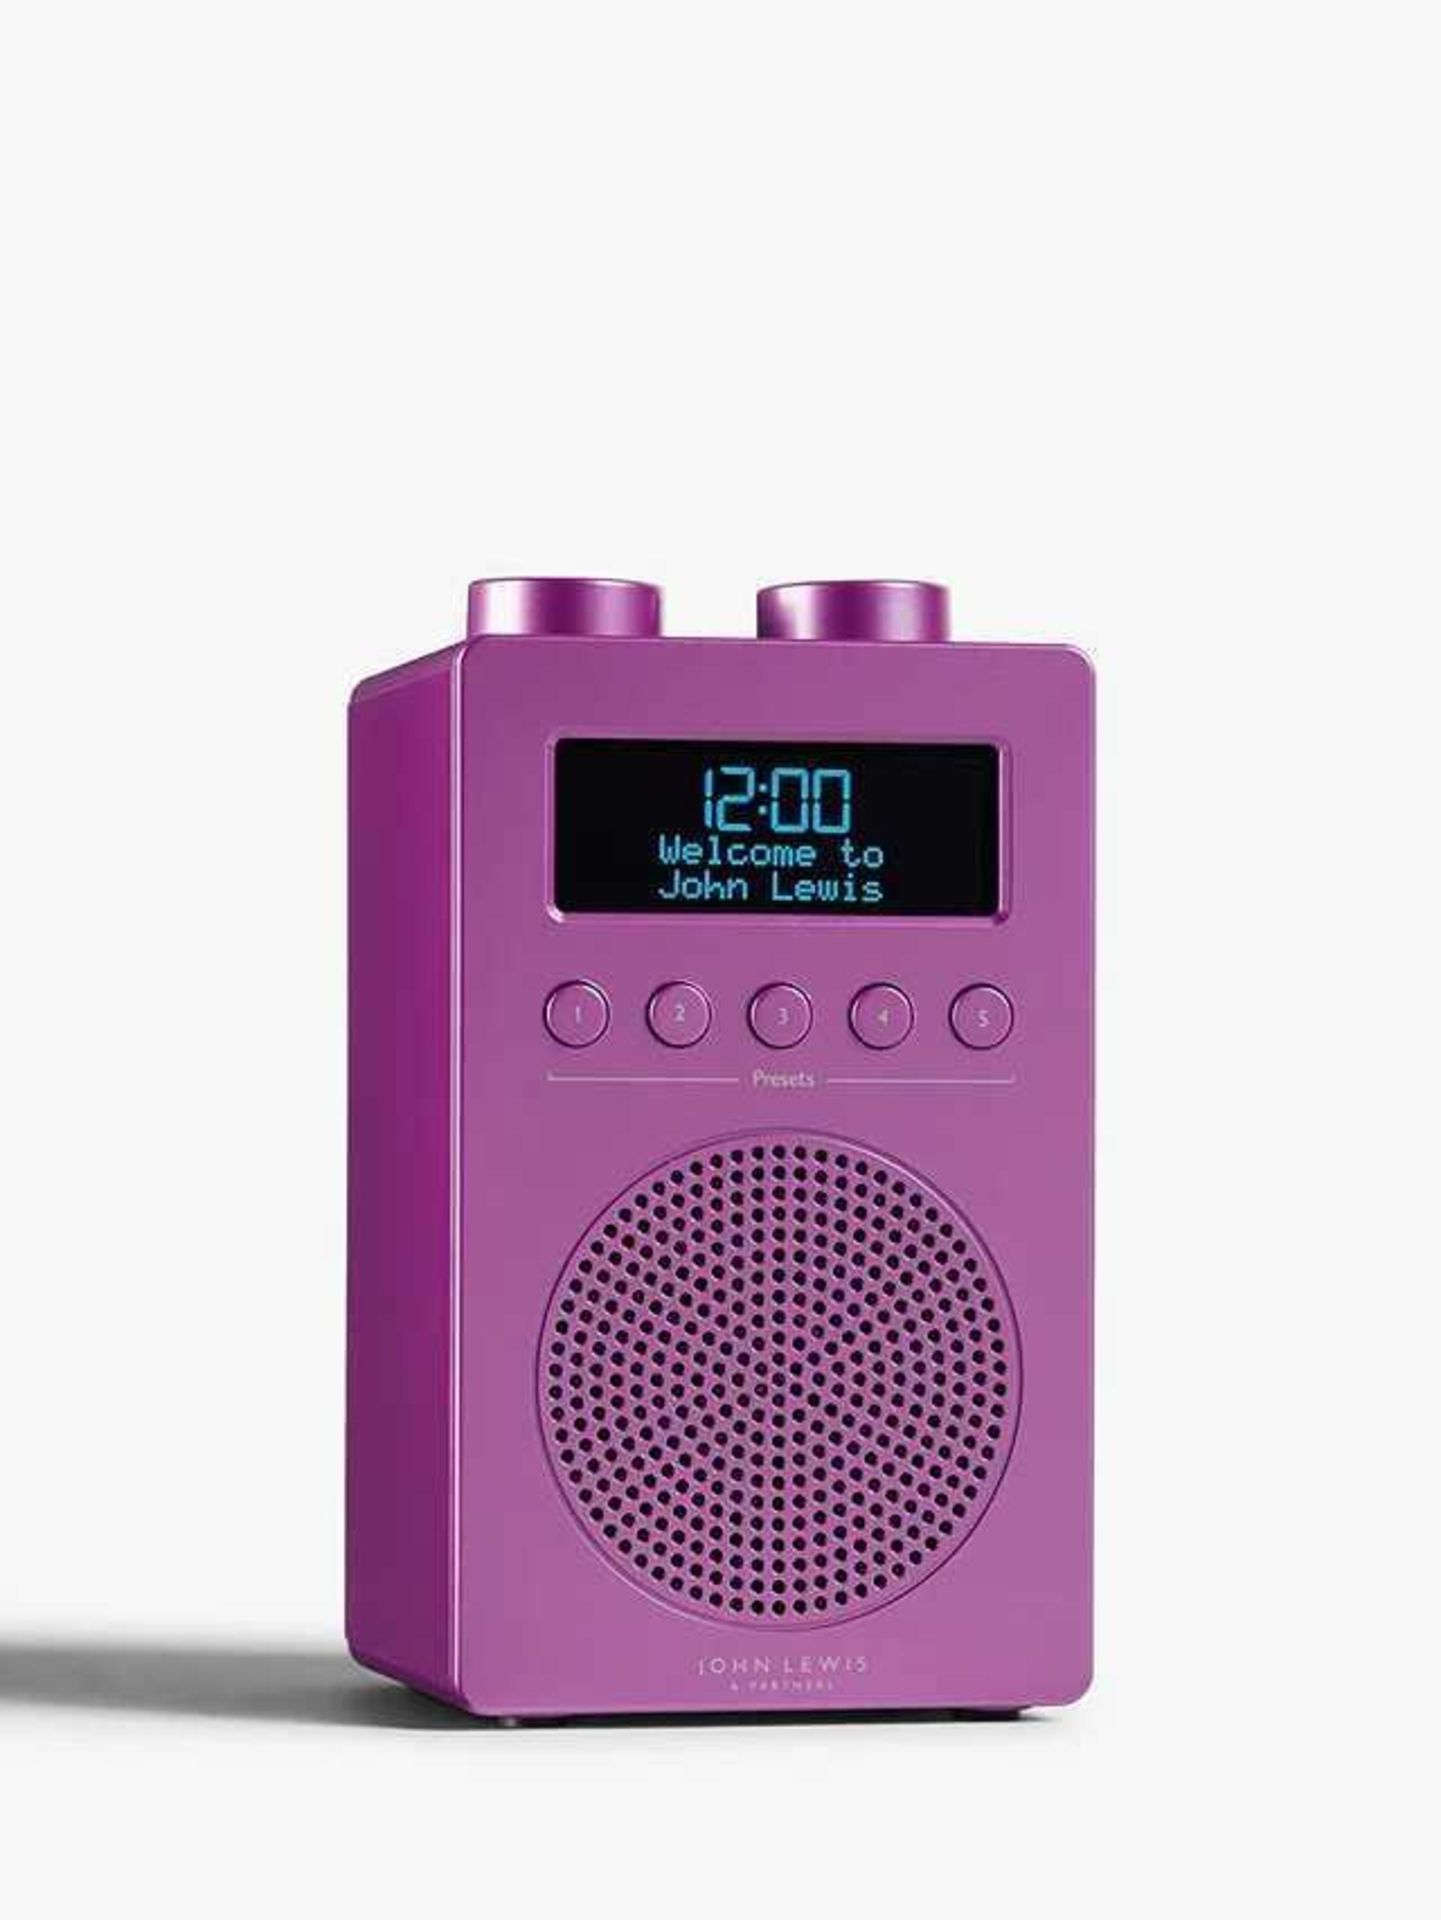 Rrp £40 Each Boxed John Lewis Spectrum Solo Dab And Fm Digital Radios - Image 7 of 7